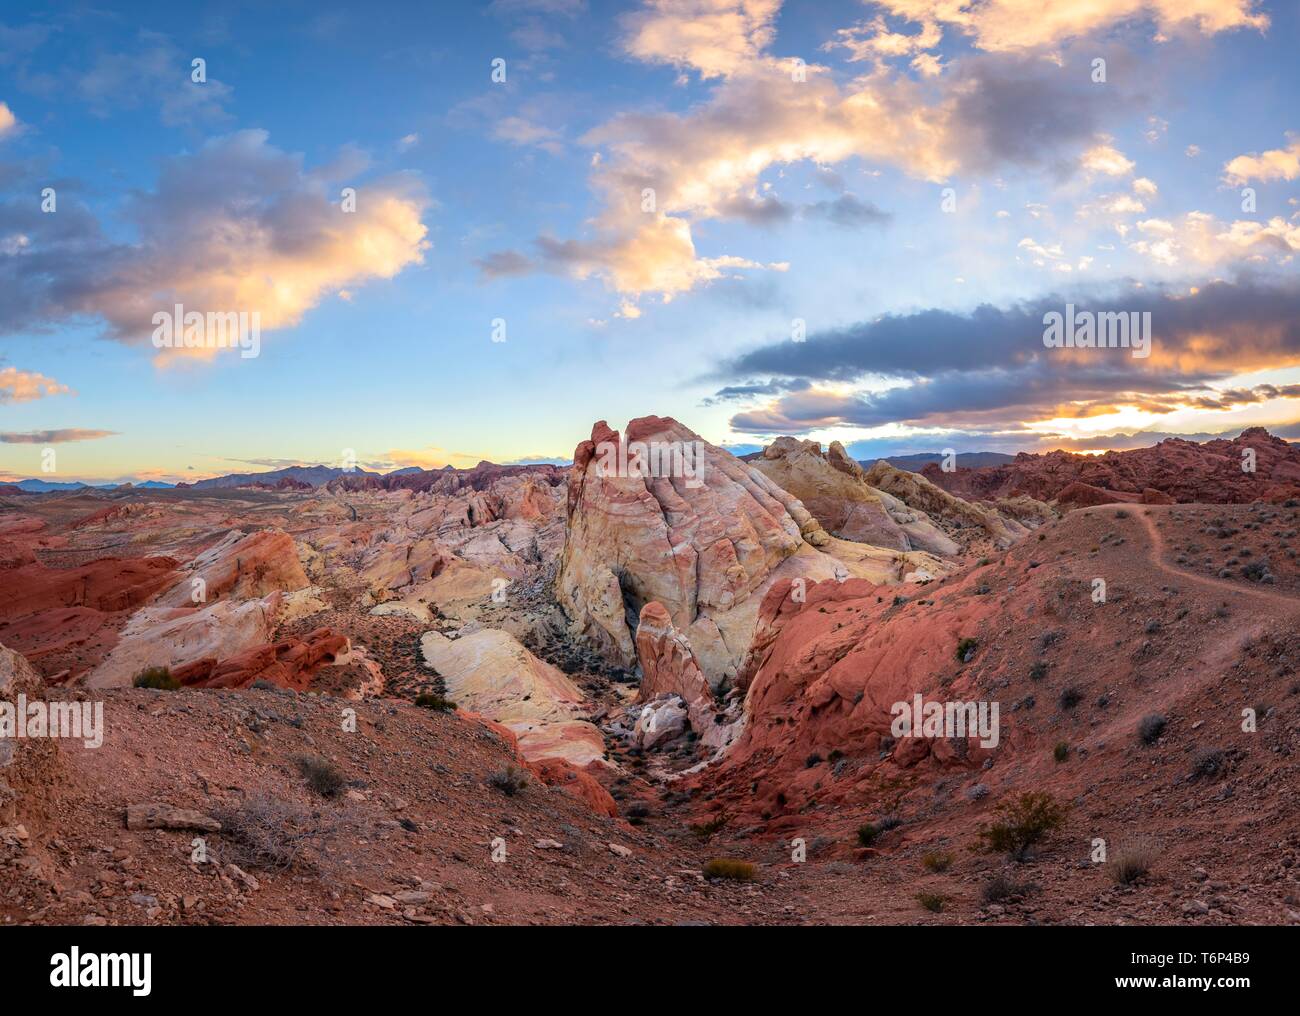 Colorful, red orange rock formations at sunset with colored clouds, White Dome, sandstone rocks, Valley of Fire State Park, Mojave Desert, Nevada, USA Stock Photo